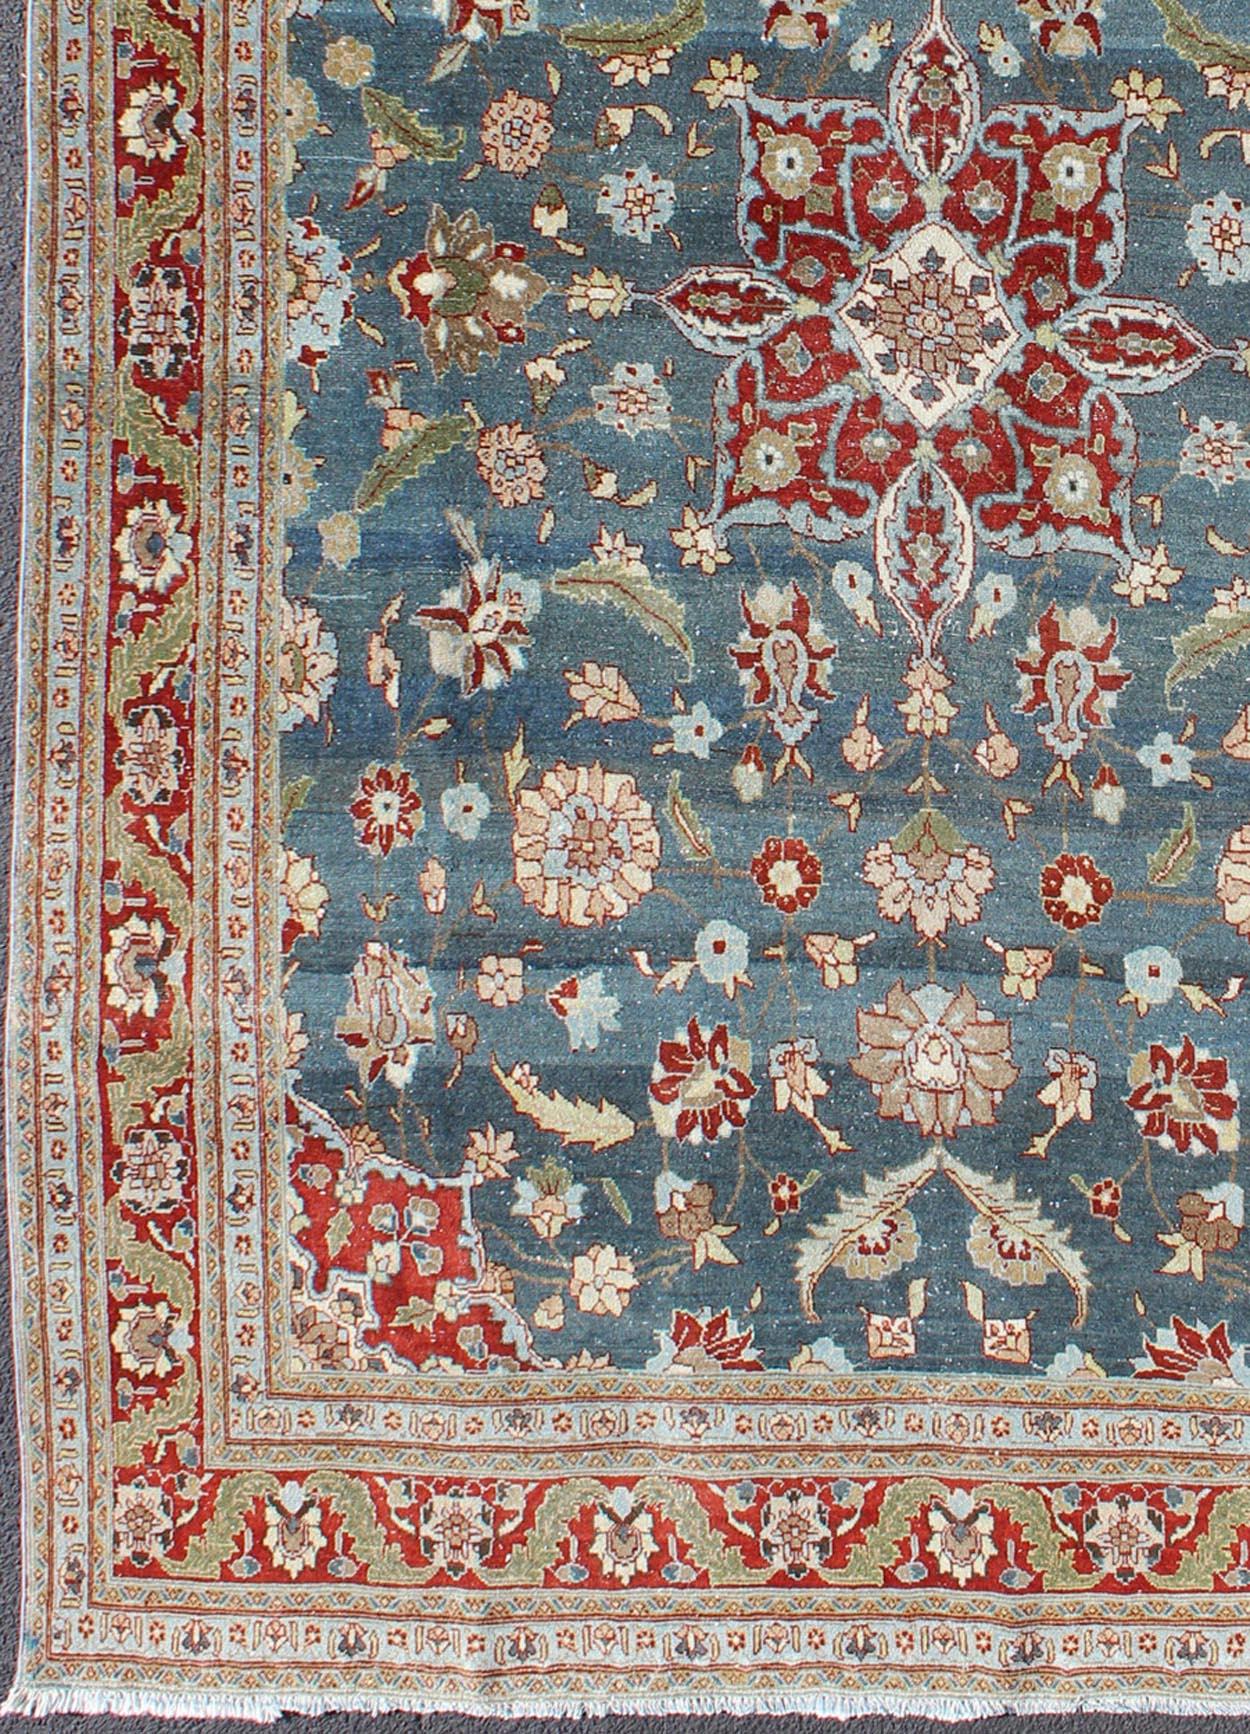 Steel blue,  antique Persian Tabriz rug with flowers and medallion, rug 18-0702, country of origin / type: Iran / Tabriz, circa 1920.

This sublime and enchanting vintage rug, a gorgeous Tabriz rug made in Iran in the early twentieth century, is a